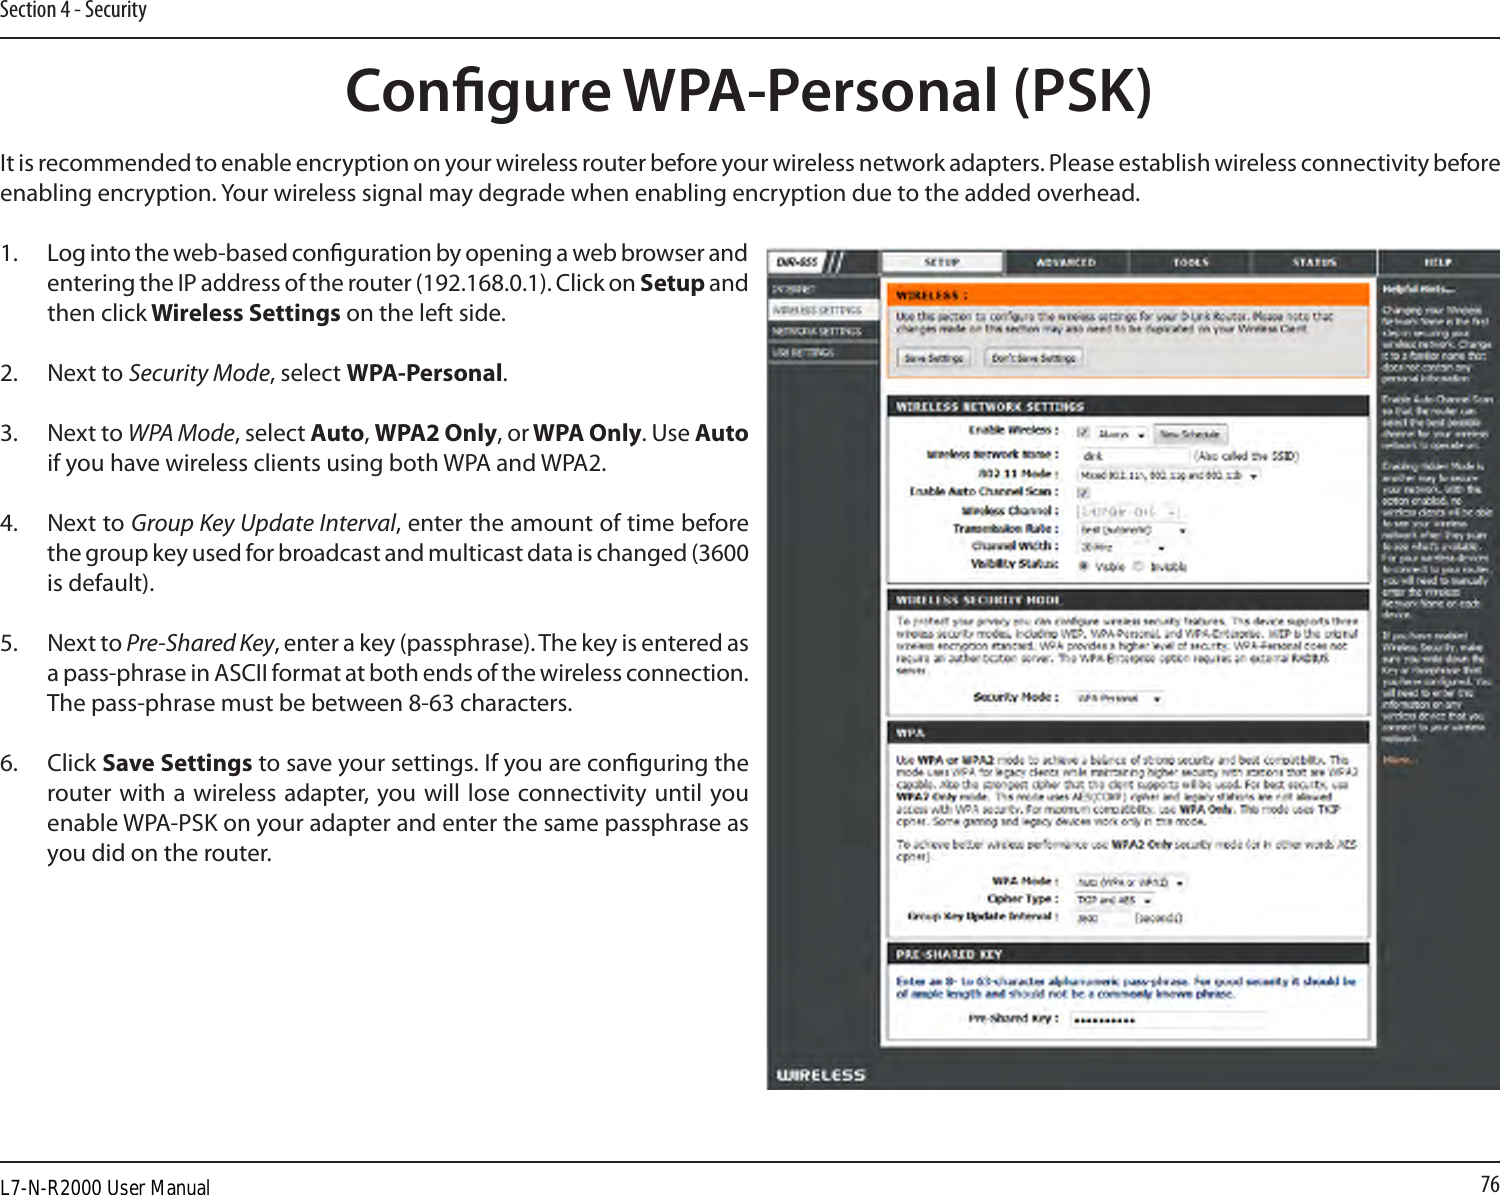 76Section 4 - SecurityCongure WPA-Personal (PSK)It is recommended to enable encryption on your wireless router before your wireless network adapters. Please establish wireless connectivity before enabling encryption. Your wireless signal may degrade when enabling encryption due to the added overhead.1. Log into the web-based conguration by opening a web browser and entering the IP address of the router (192.168.0.1). Click on Setup and then click Wireless Settings on the left side.2.   Next to Security Mode, select WPA-Personal.3.  Next to WPA Mode, select Auto, WPA2 Only, or WPA Only. Use Auto if you have wireless clients using both WPA and WPA2.4.   Next to Group Key Update Interval, enter the amount of time before the group key used for broadcast and multicast data is changed (3600 is default).5.  Next to Pre-Shared Key, enter a key (passphrase). The key is entered as a pass-phrase in ASCII format at both ends of the wireless connection. The pass-phrase must be between 8-63 characters. 6.  Click Save Settings to save your settings. If you are conguring the router with a wireless adapter, you will lose  connectivity until you enable WPA-PSK on your adapter and enter the same passphrase as you did on the router.L7-N-R2000 User Manual